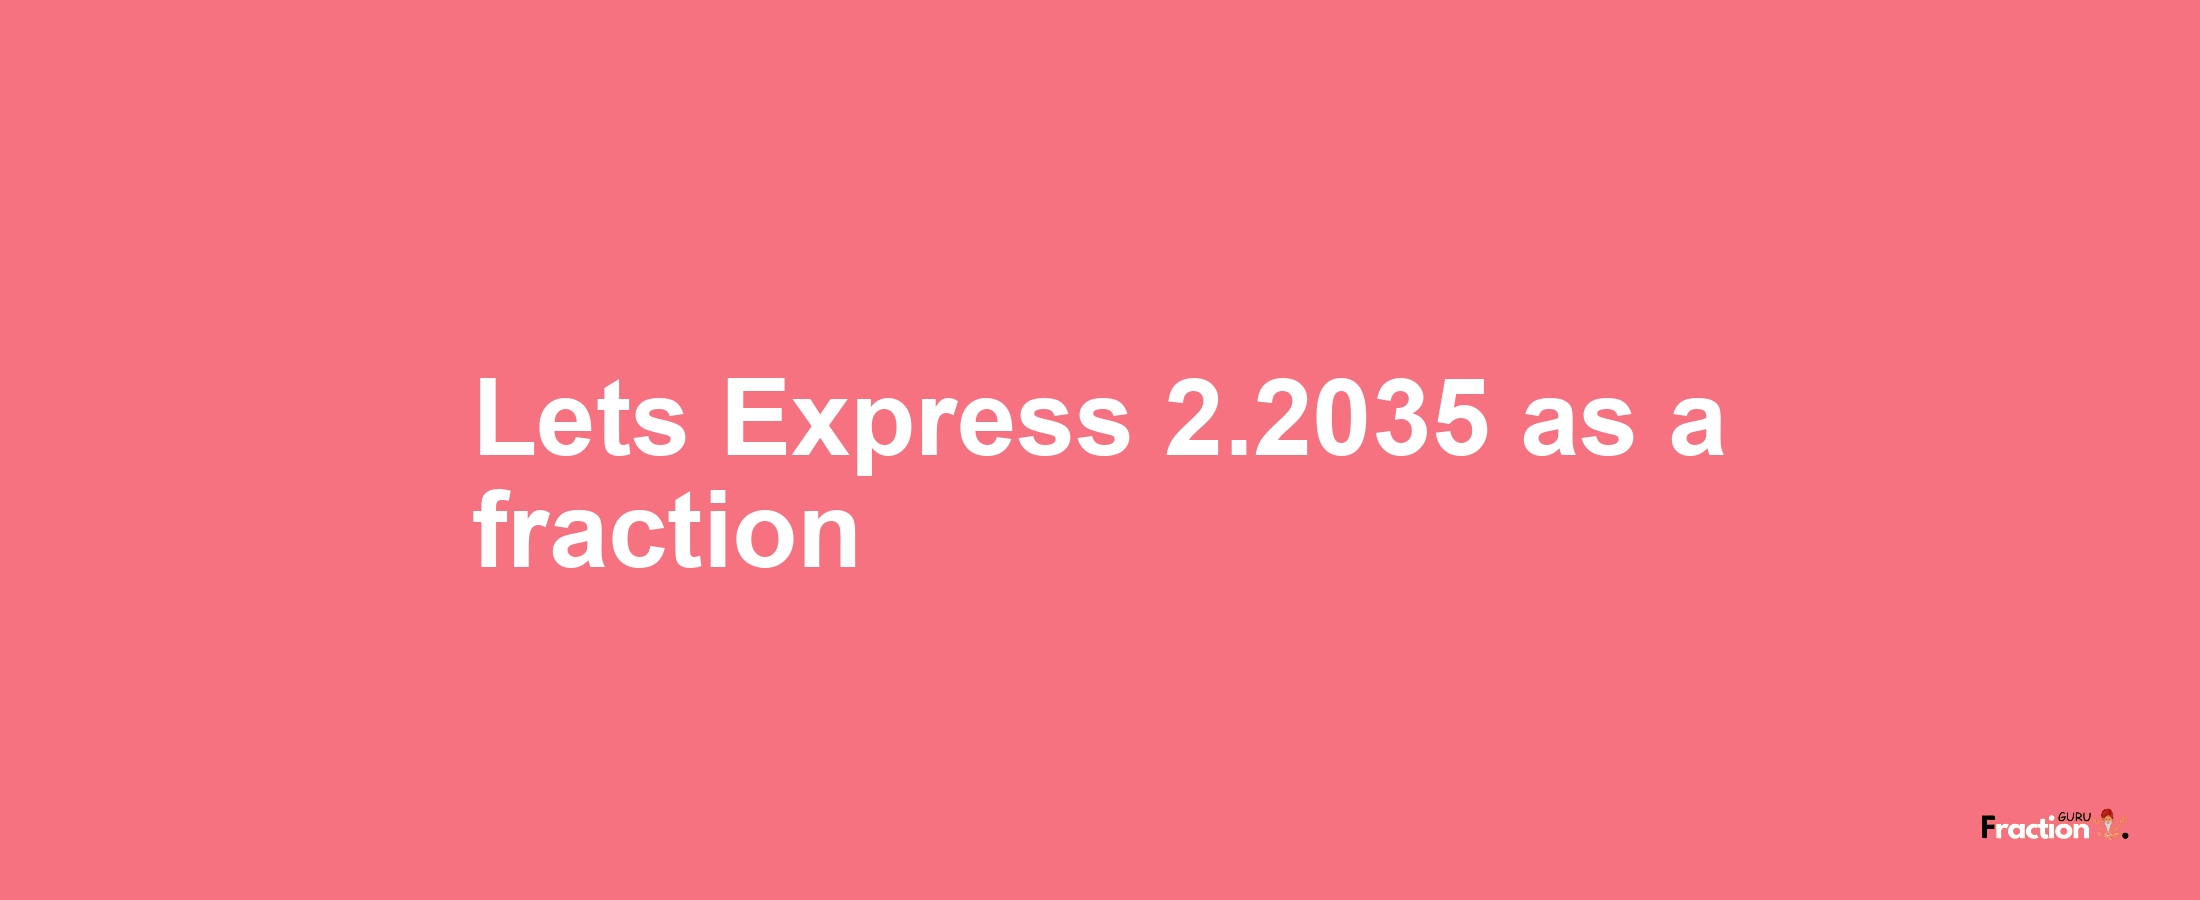 Lets Express 2.2035 as afraction